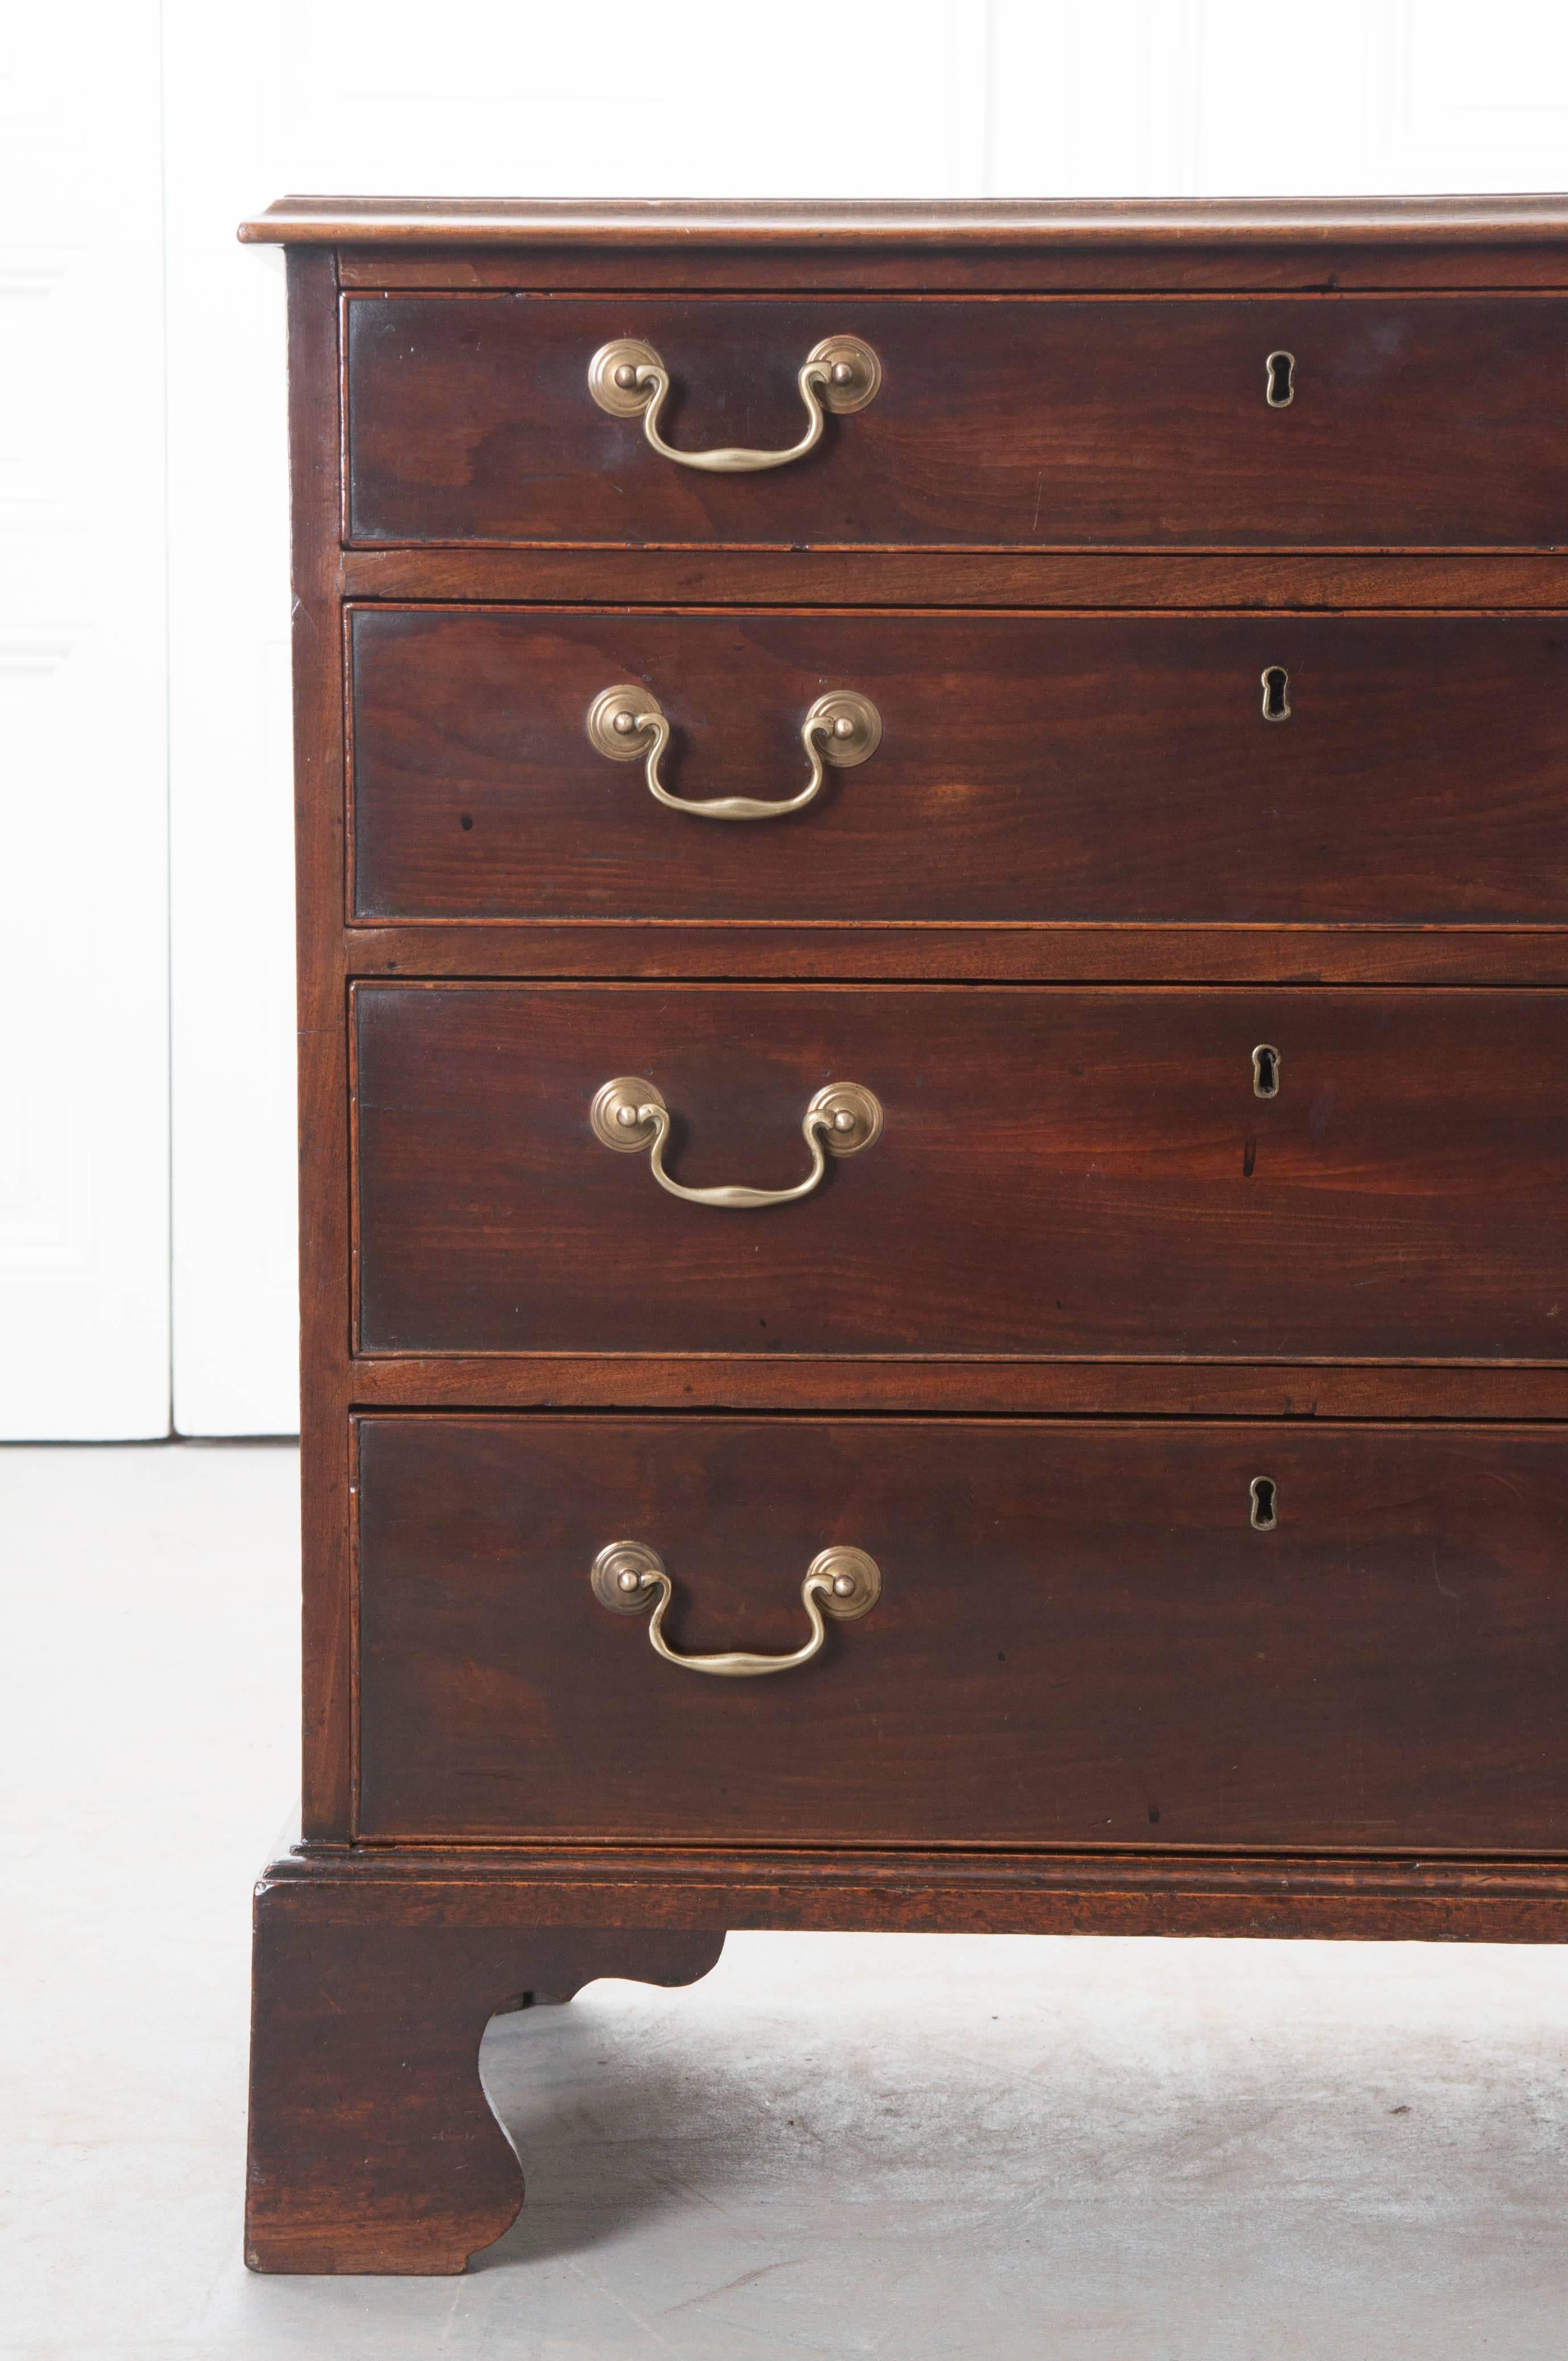 A small mahogany four drawer chest of drawers from the beginning of the 19th century, England. The four graduated drawers each have two shaped brass bail handles and inset brass escutcheons. The handsome mahogany is rich, with deep, dark tones and